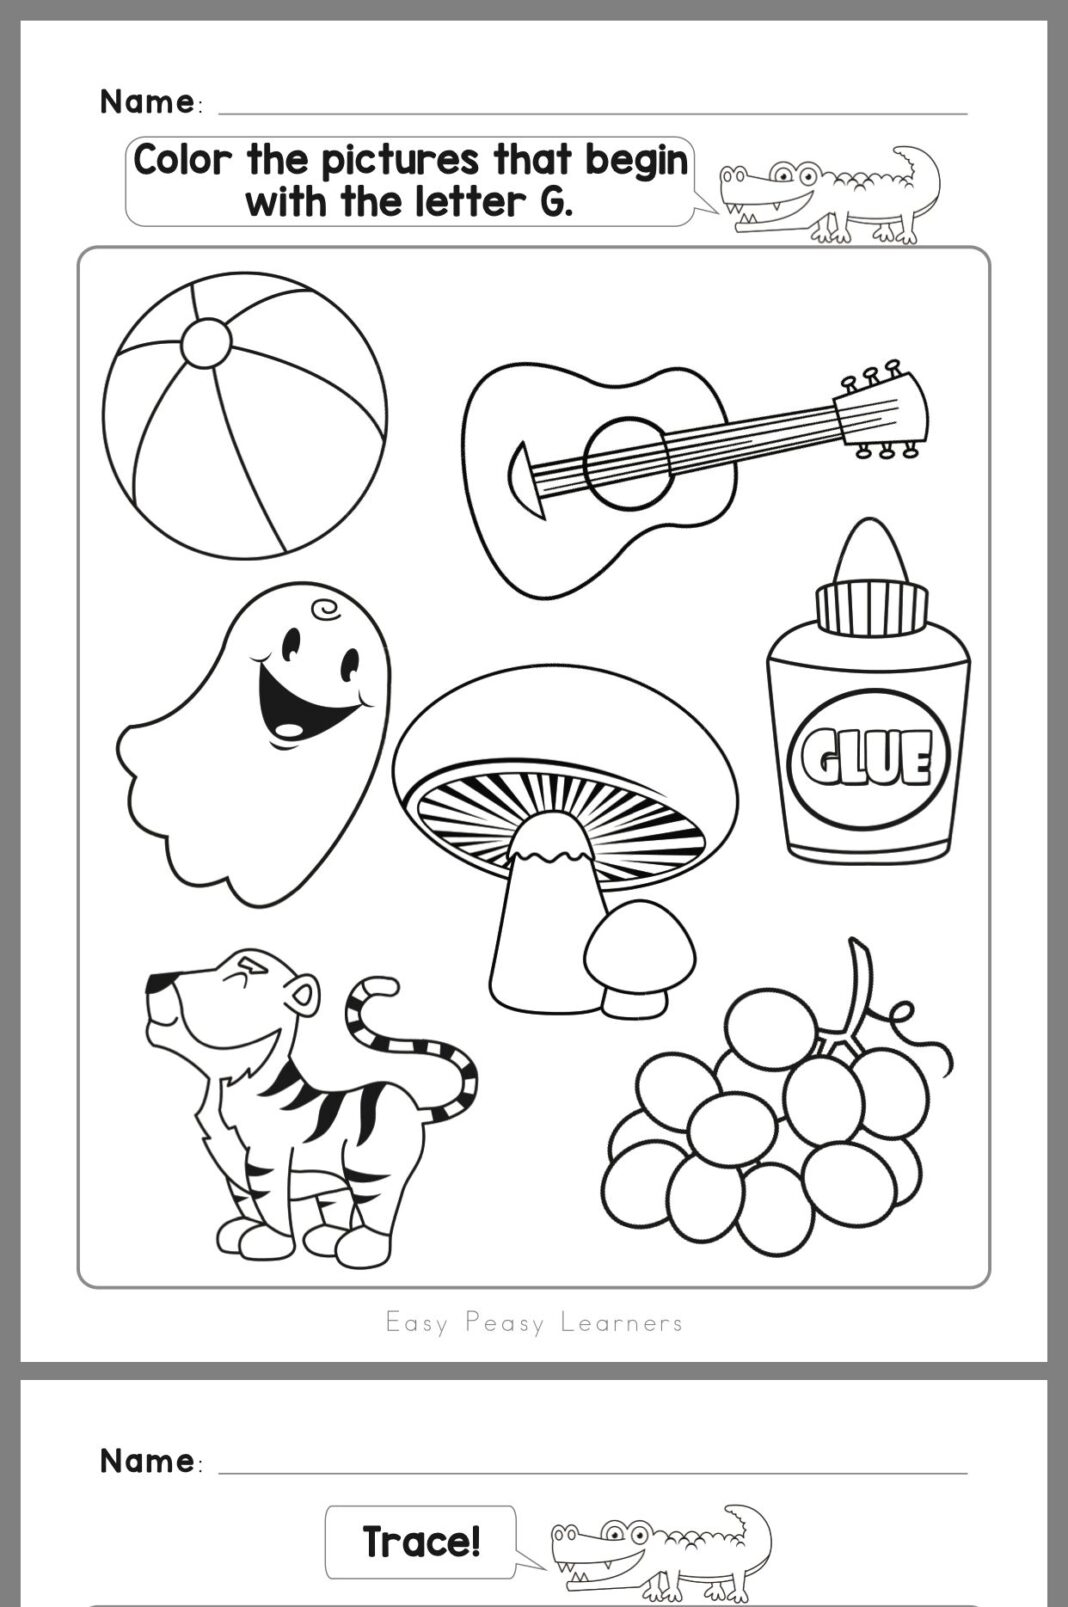 Worksheets : Writing Generator For Kindergarten. Fun Maths throughout Letter S Worksheets Easy Peasy